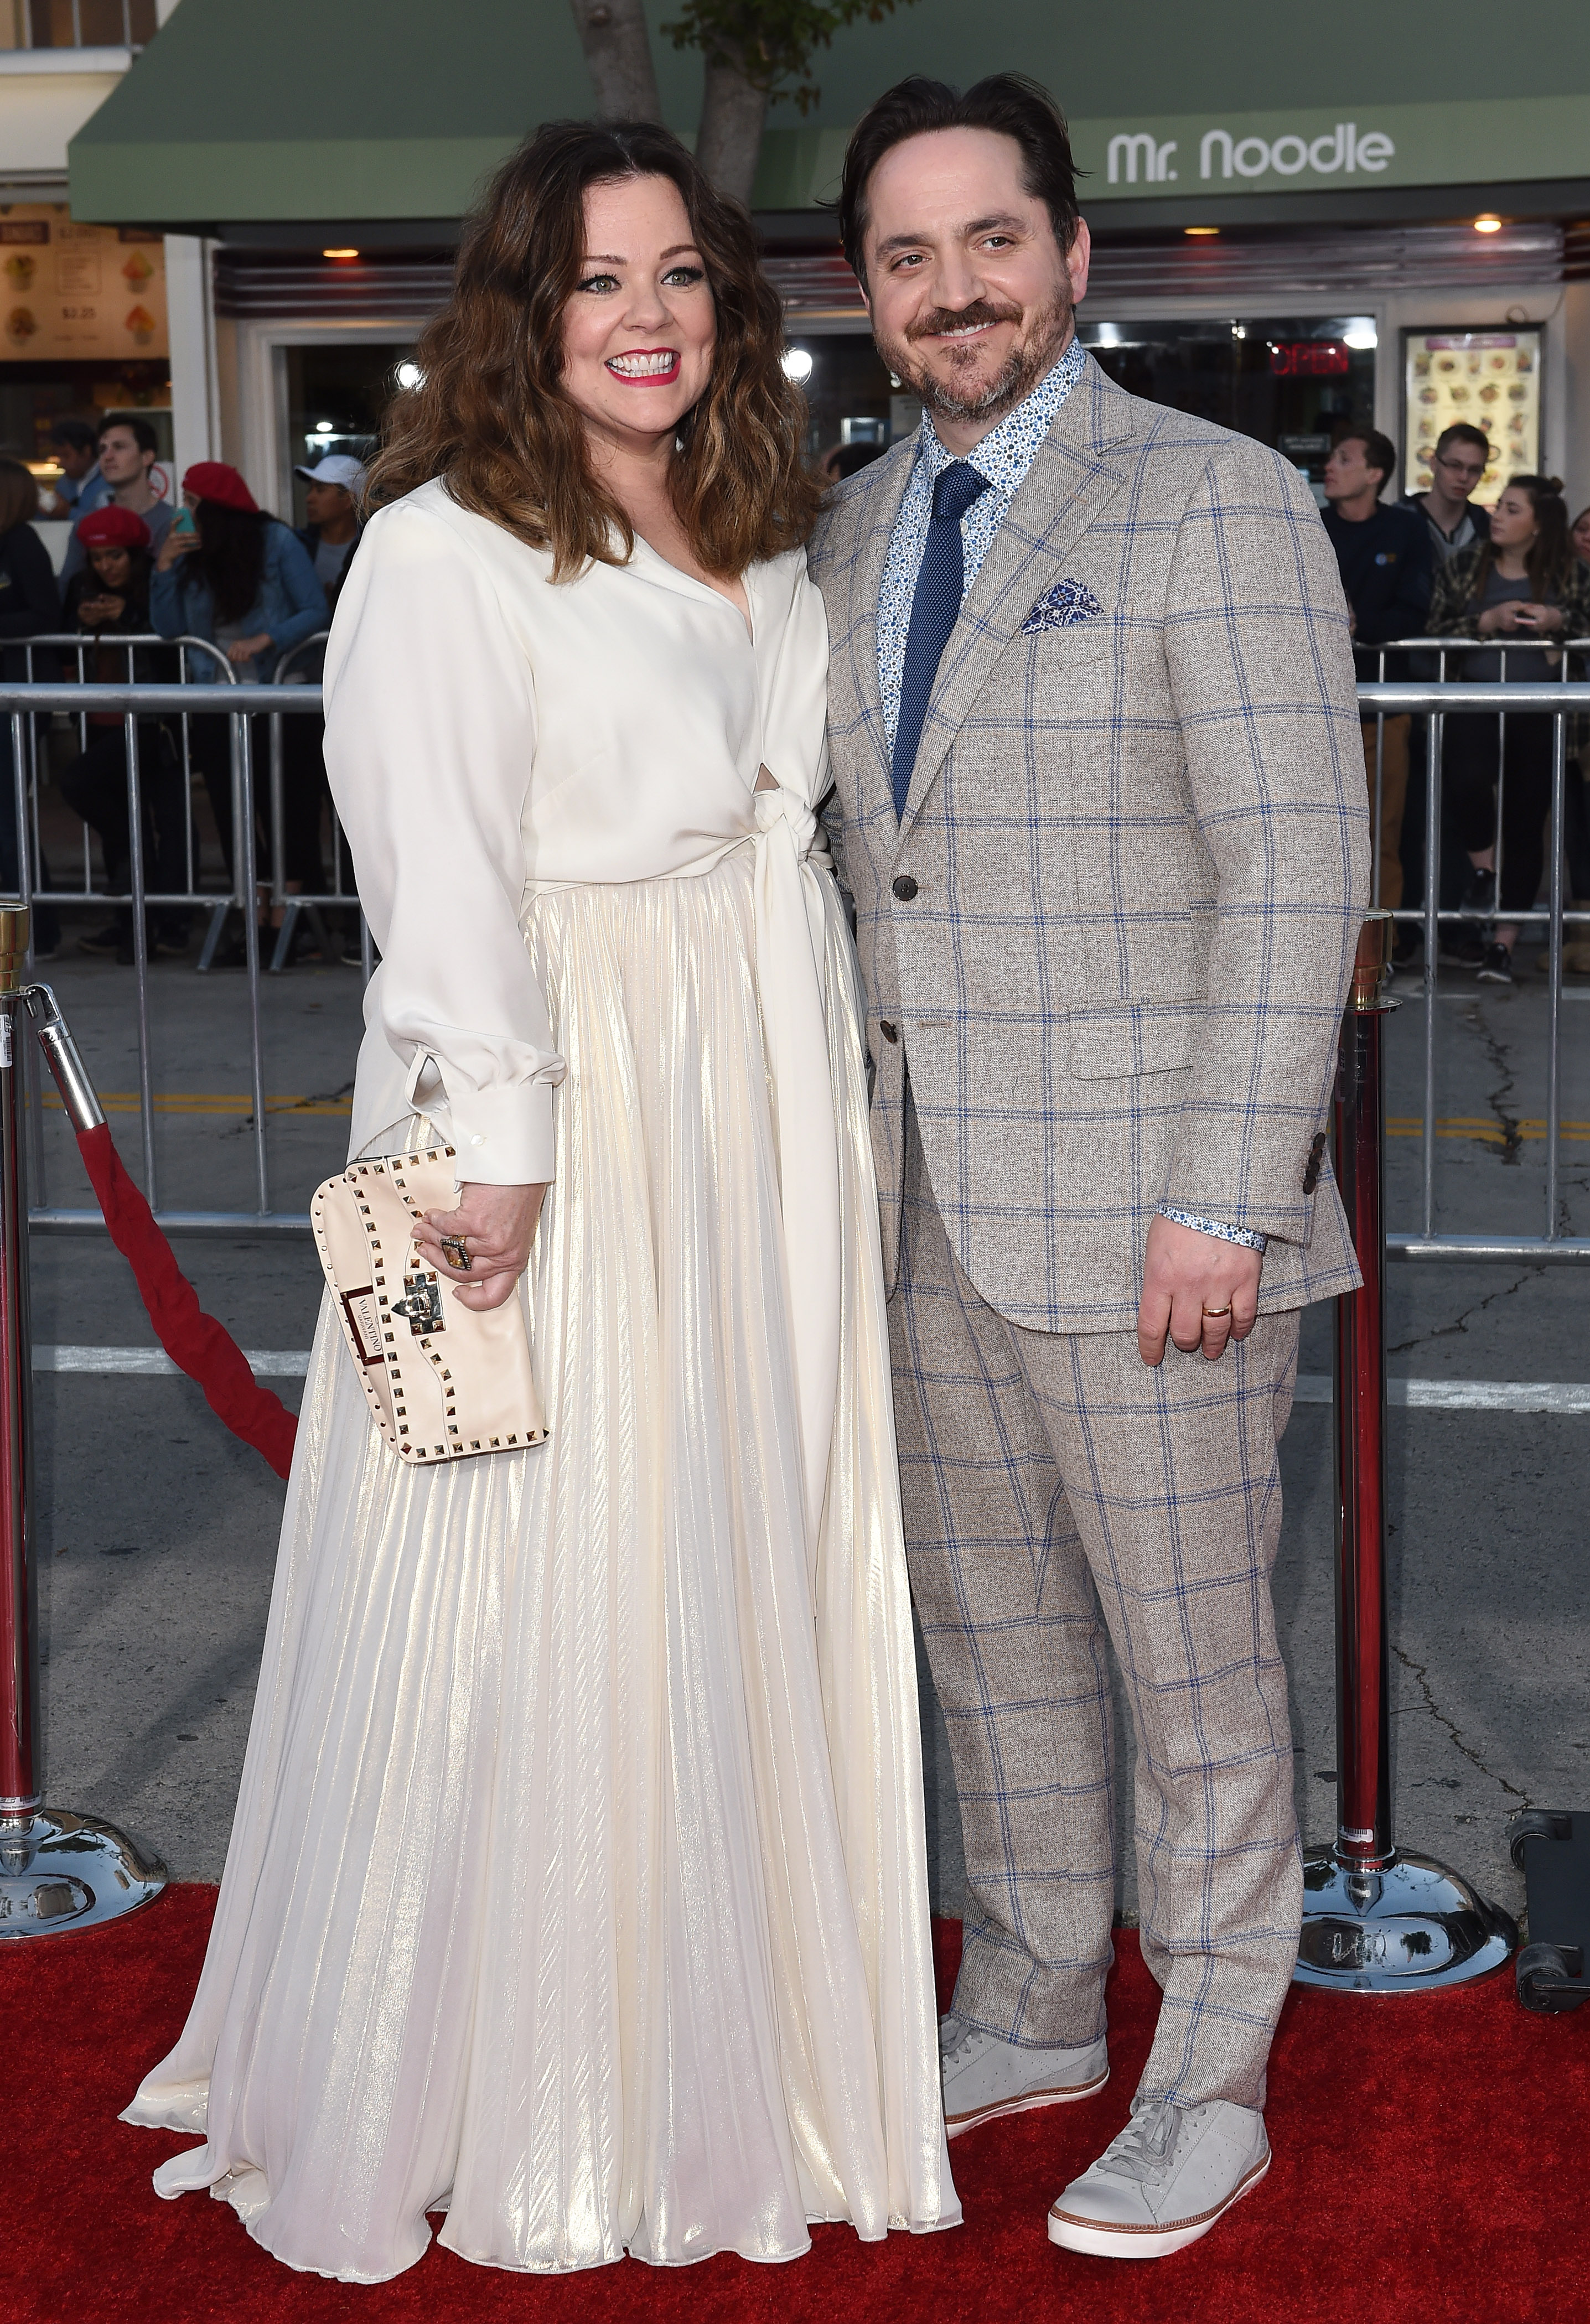 Actress Melissa McCarthy and husband Ben Falcone arrive at the premiere of USA Pictures' 'The Boss' at Regency Village Theatre on March 28, 2016, in Westwood, California. | Source: Getty Images